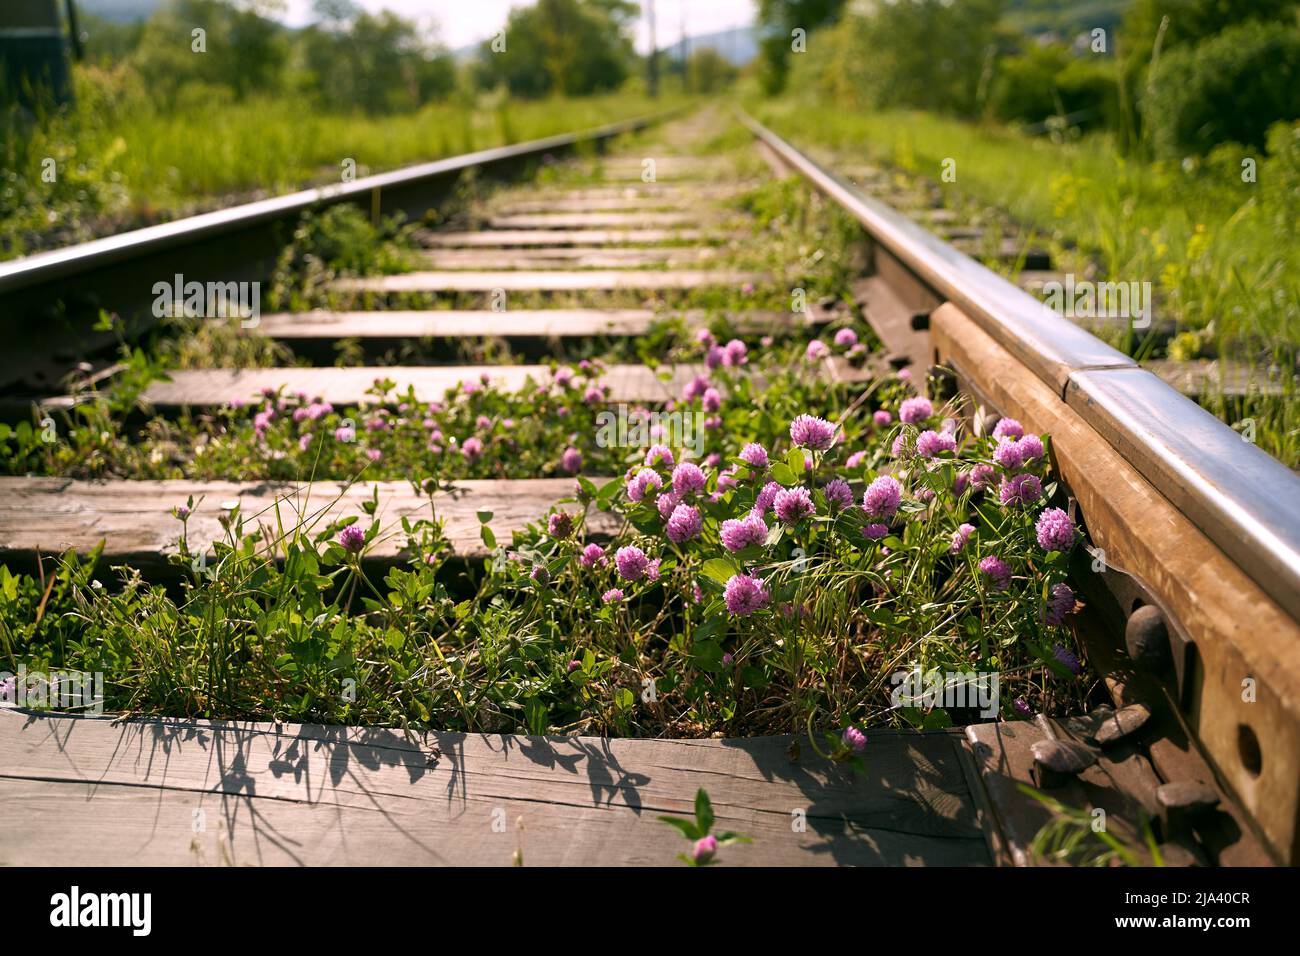 Pink violet blooming clover aka trifolium pratense growing between rails on railway in the fields Stock Photo